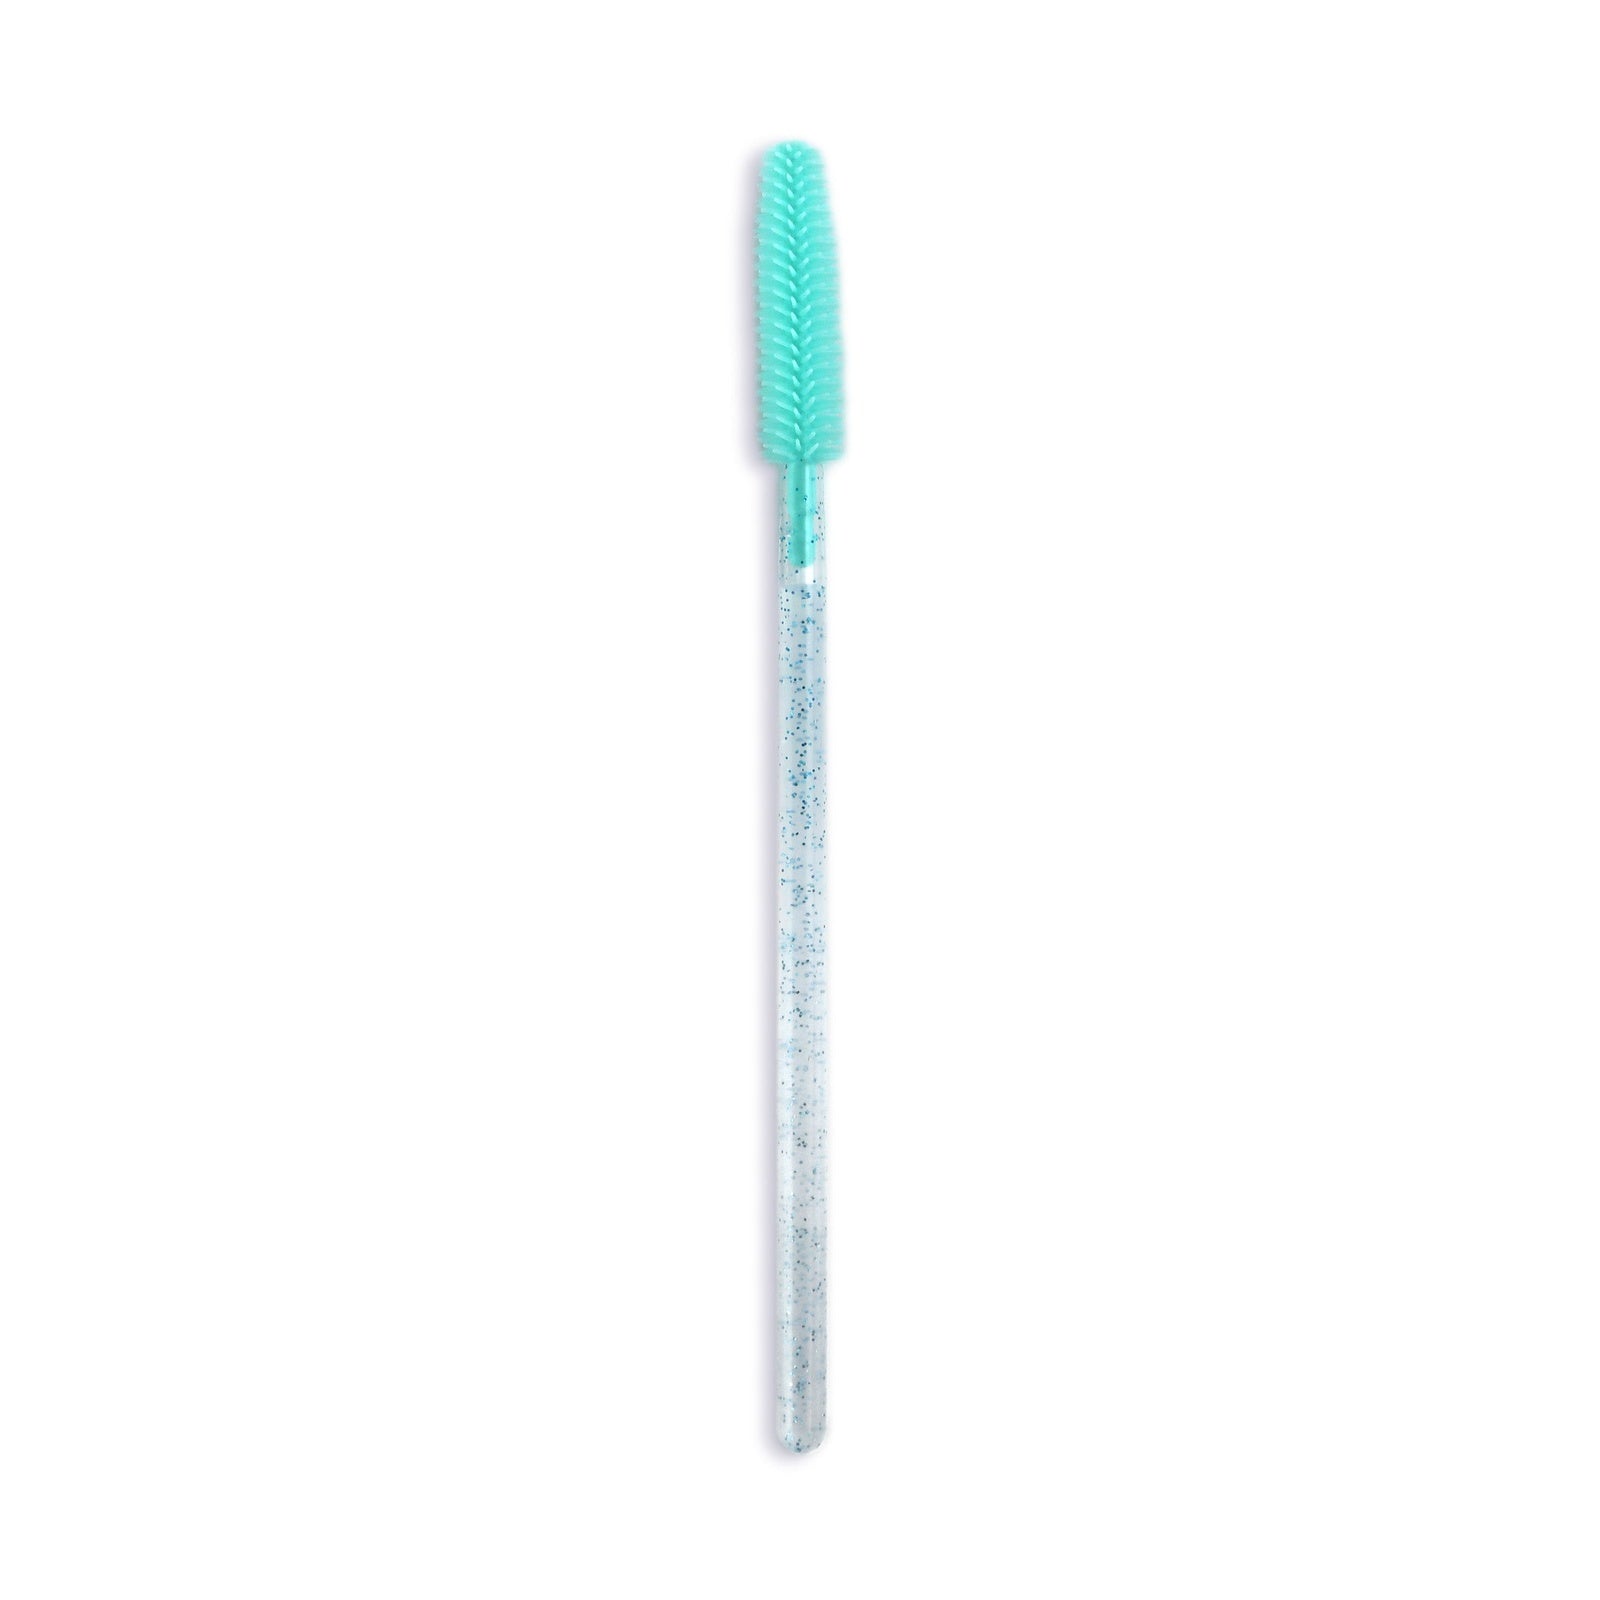 Apothie Disposable Silicone Mascara Wands Pink Crystal